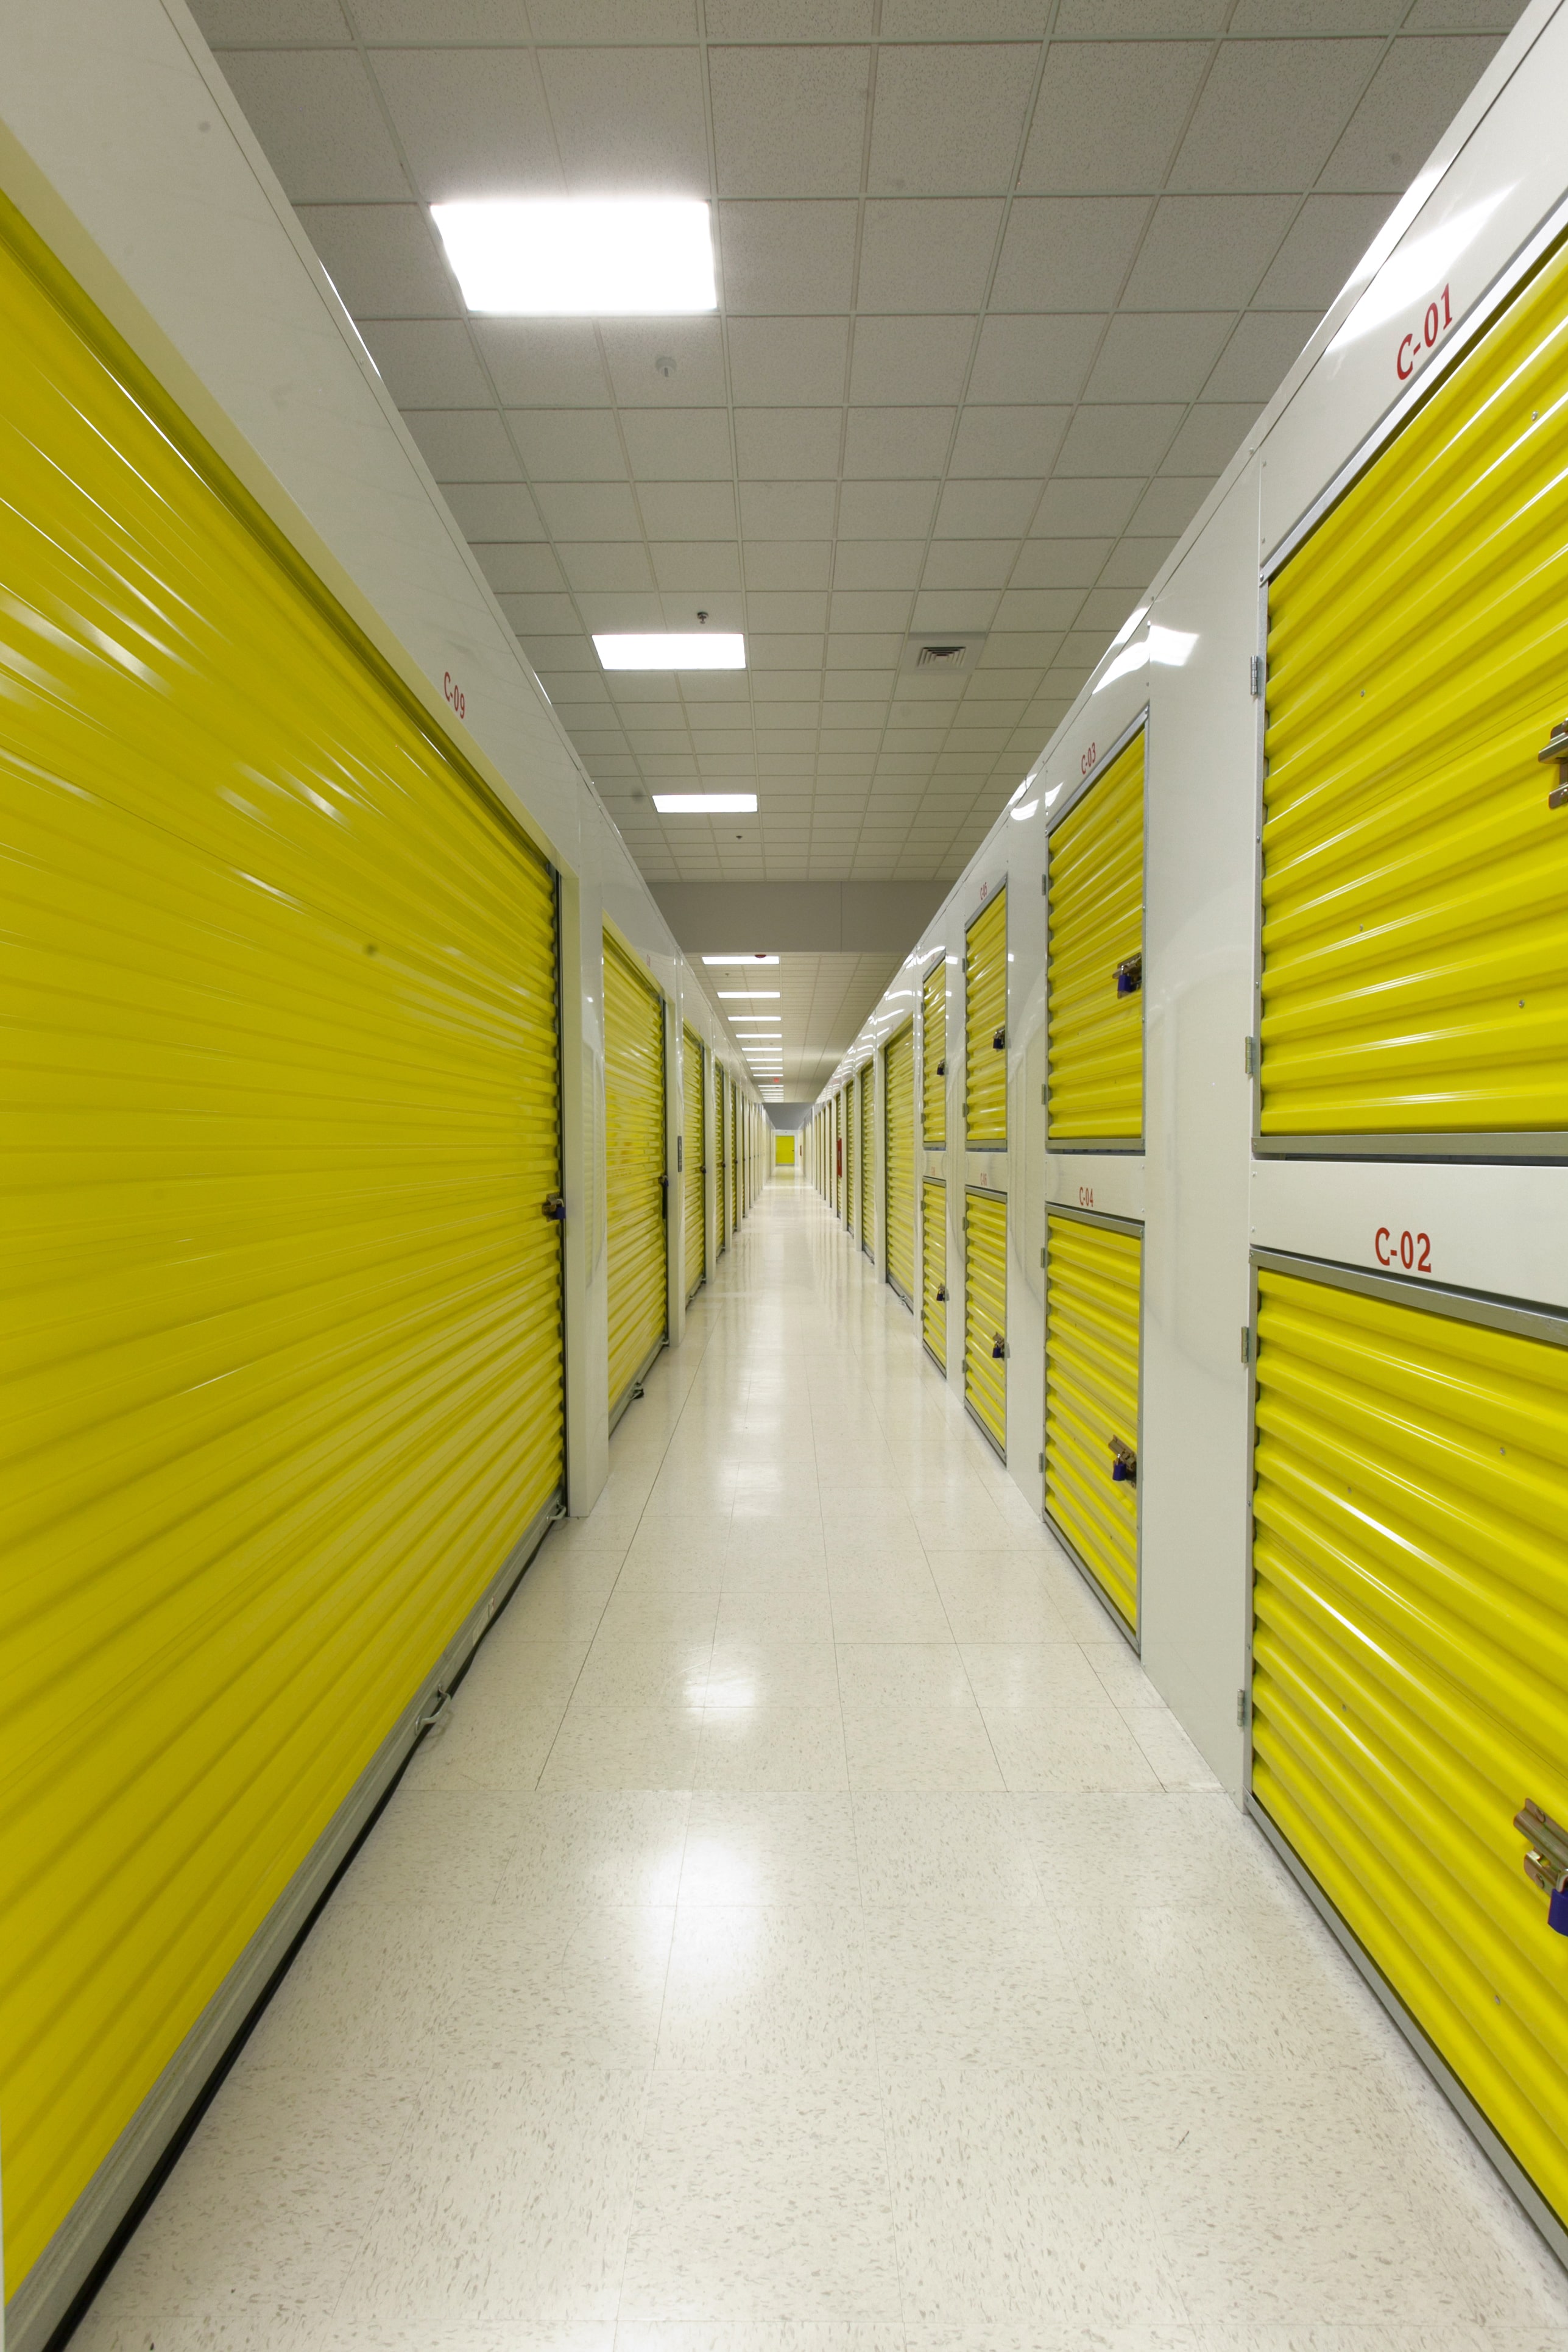 Janus hallway system with yellow roll-up doors and lockers